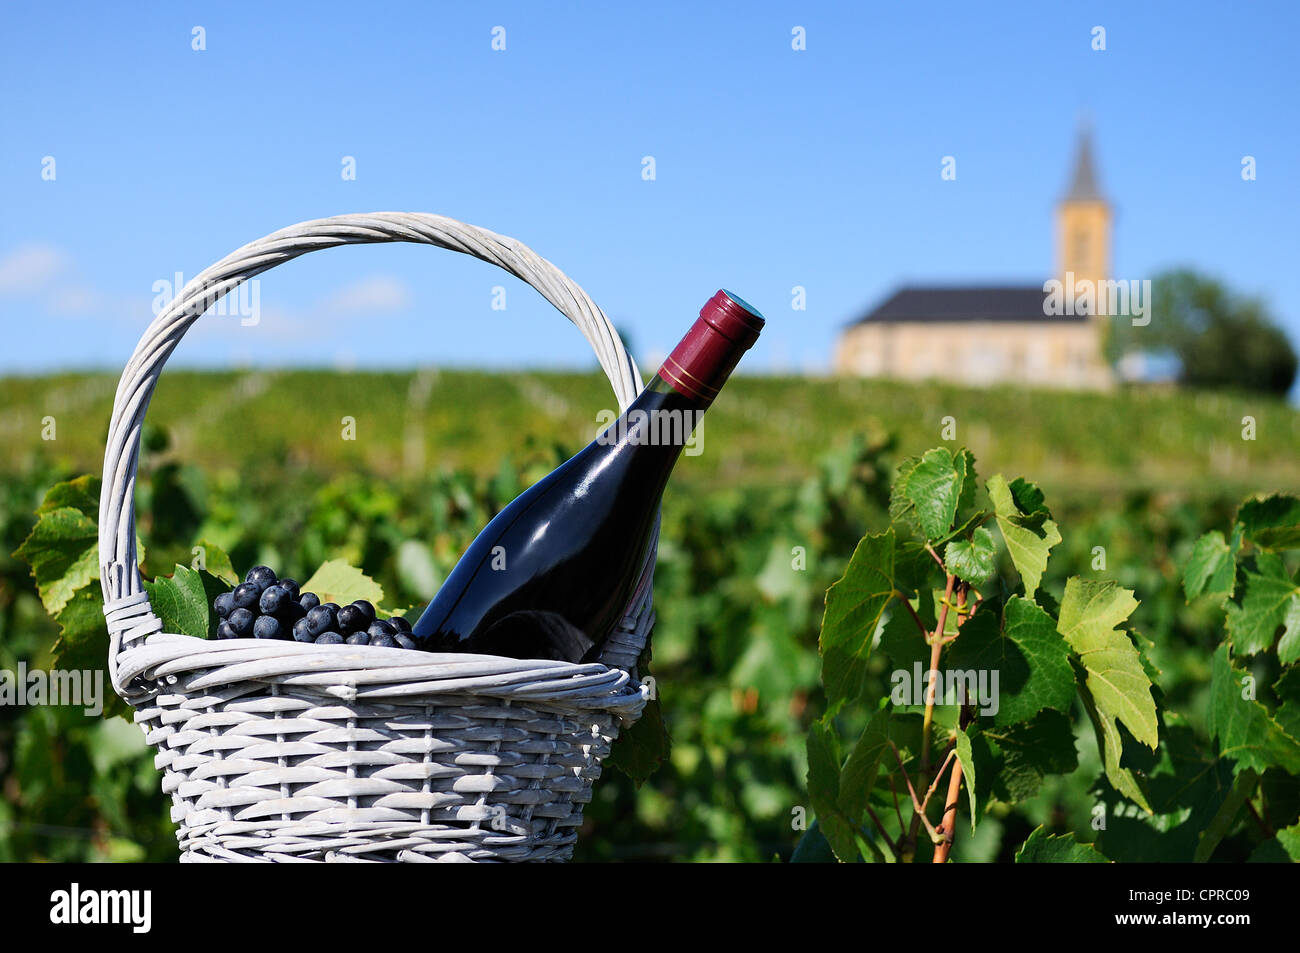 Bottle of red wine in a basket of reasons near a typical church Stock Photo